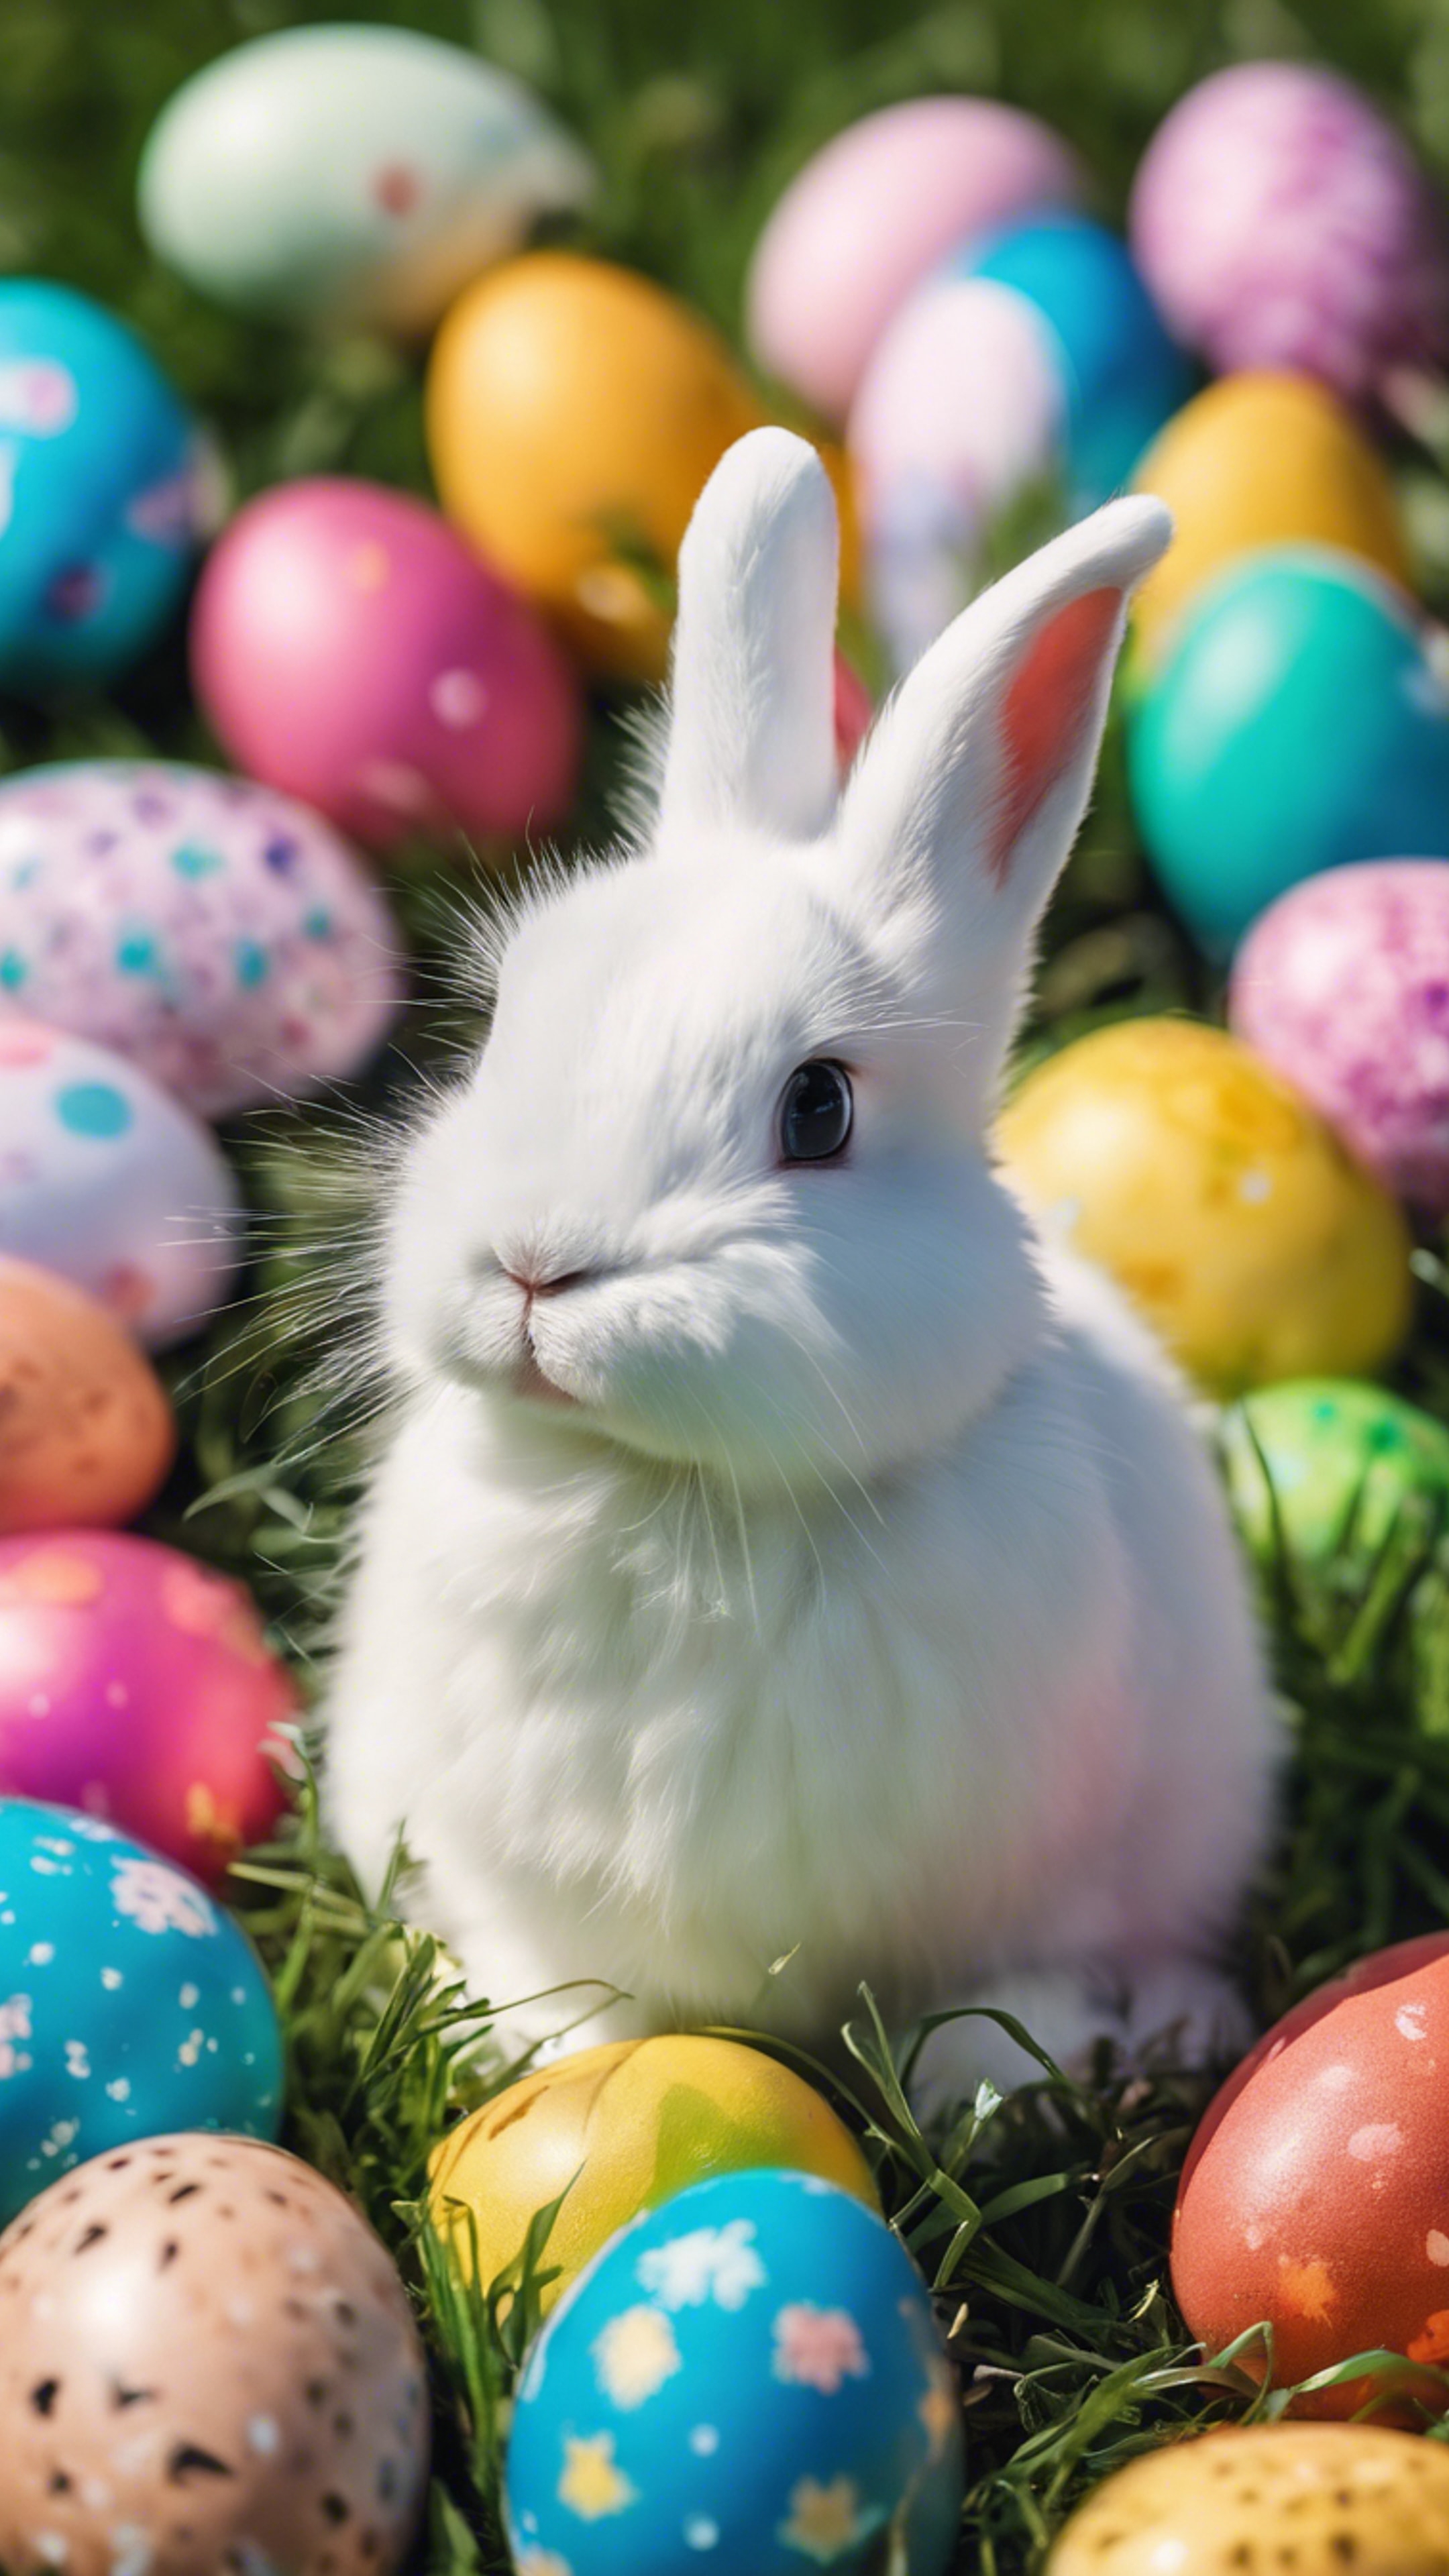 A group of fluffy rabbits surrounded by colorful Easter eggs in a sunny meadow. Tapeta[da4f773d6ea74733b4fe]